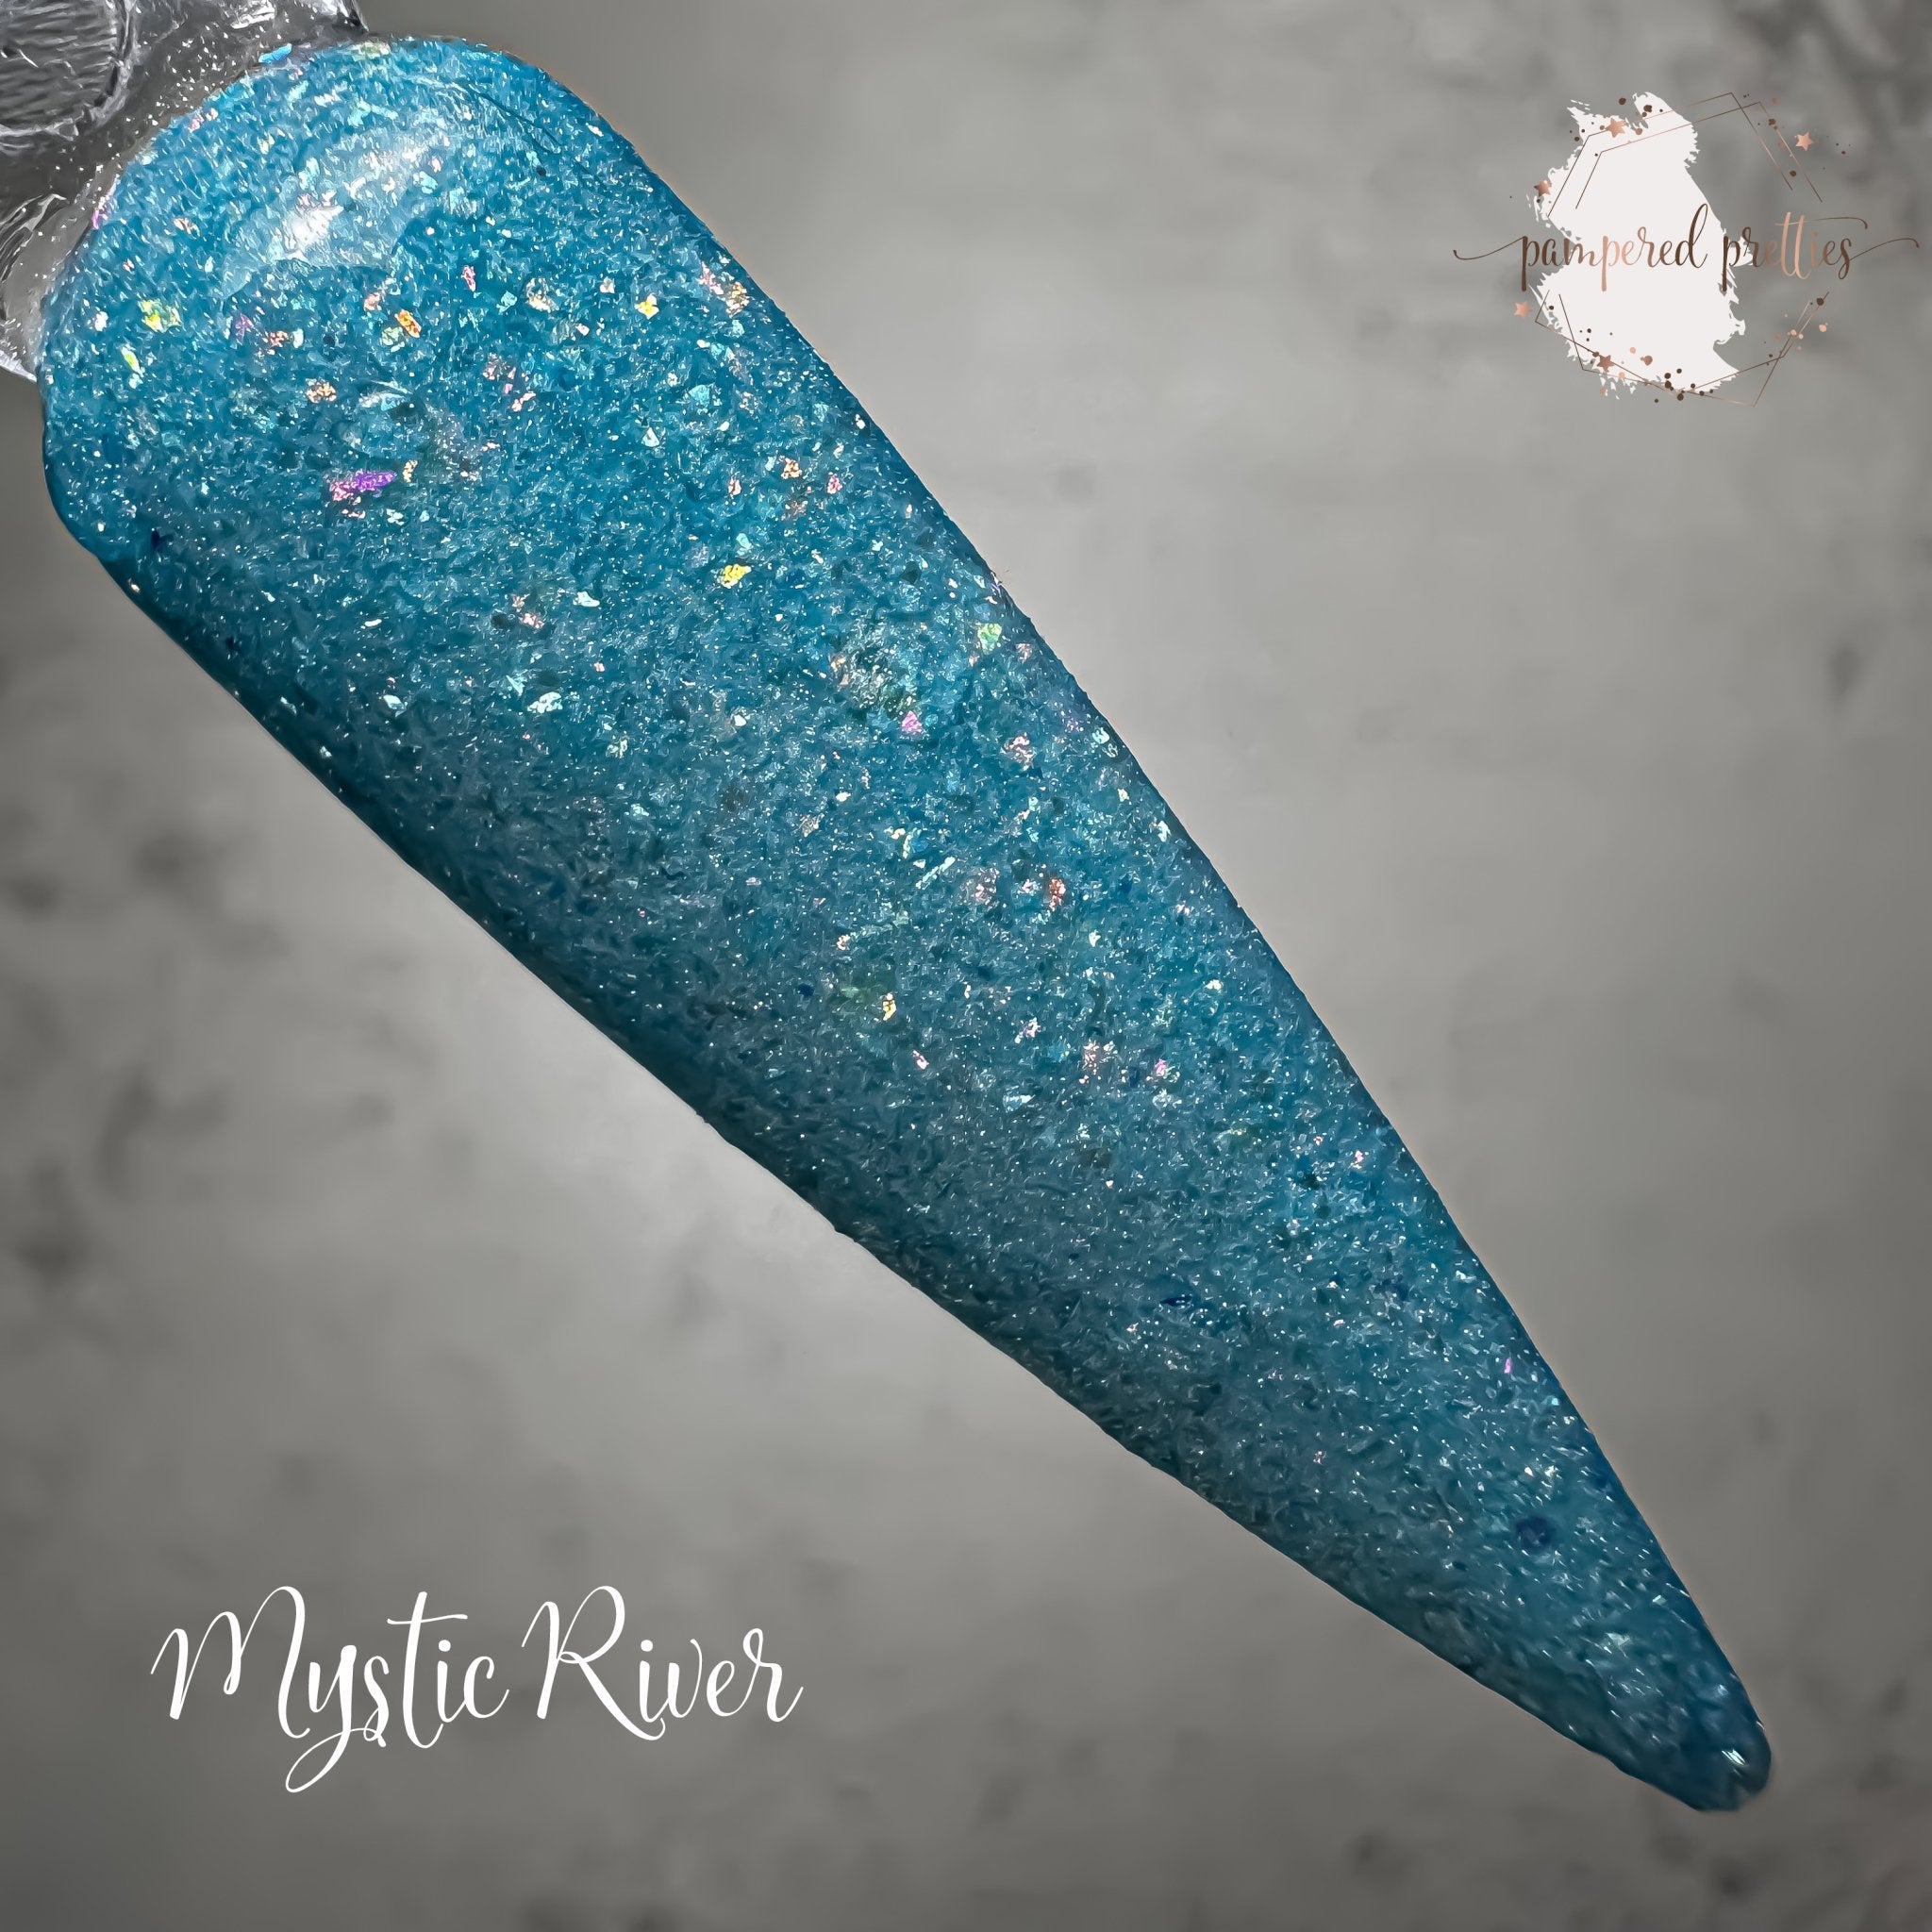 Mystic River - Pampered Pretties